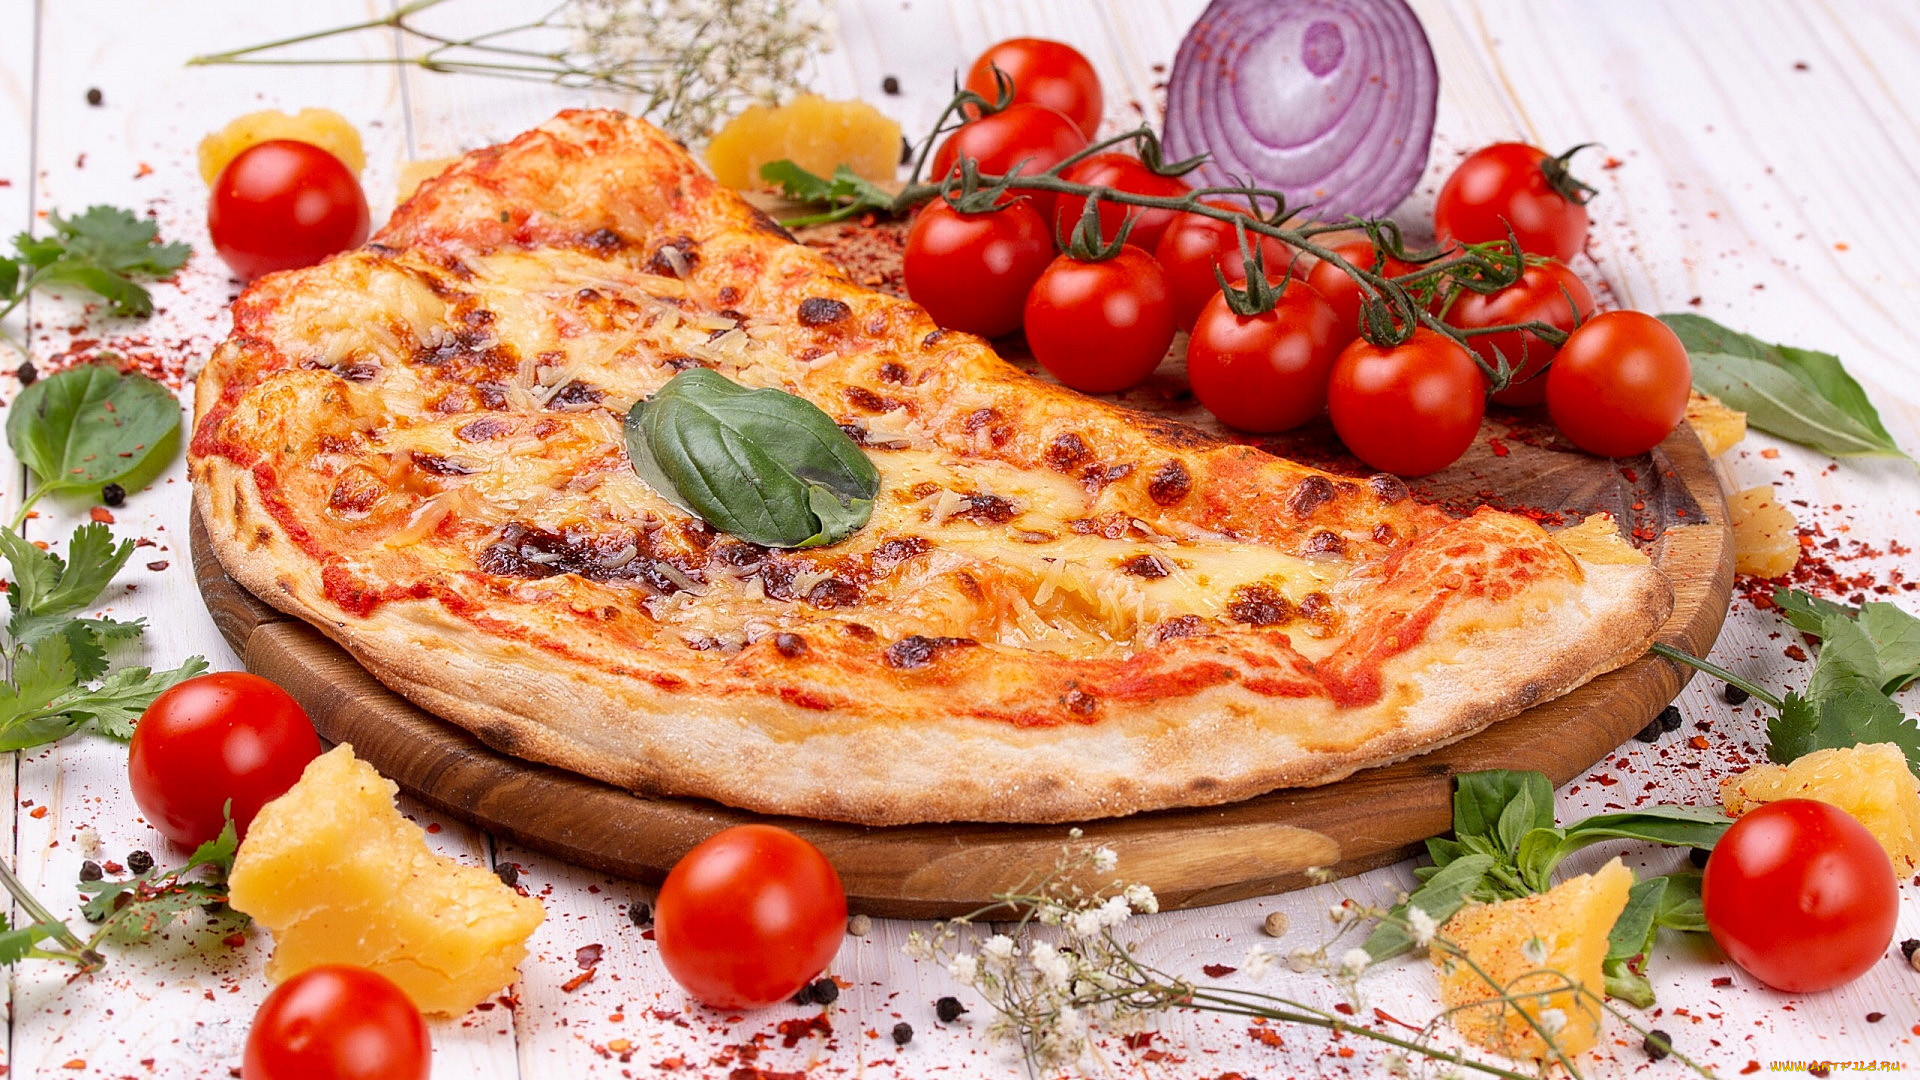 Food Pizza Tomatoes Vegetables Cheese 1920x1080